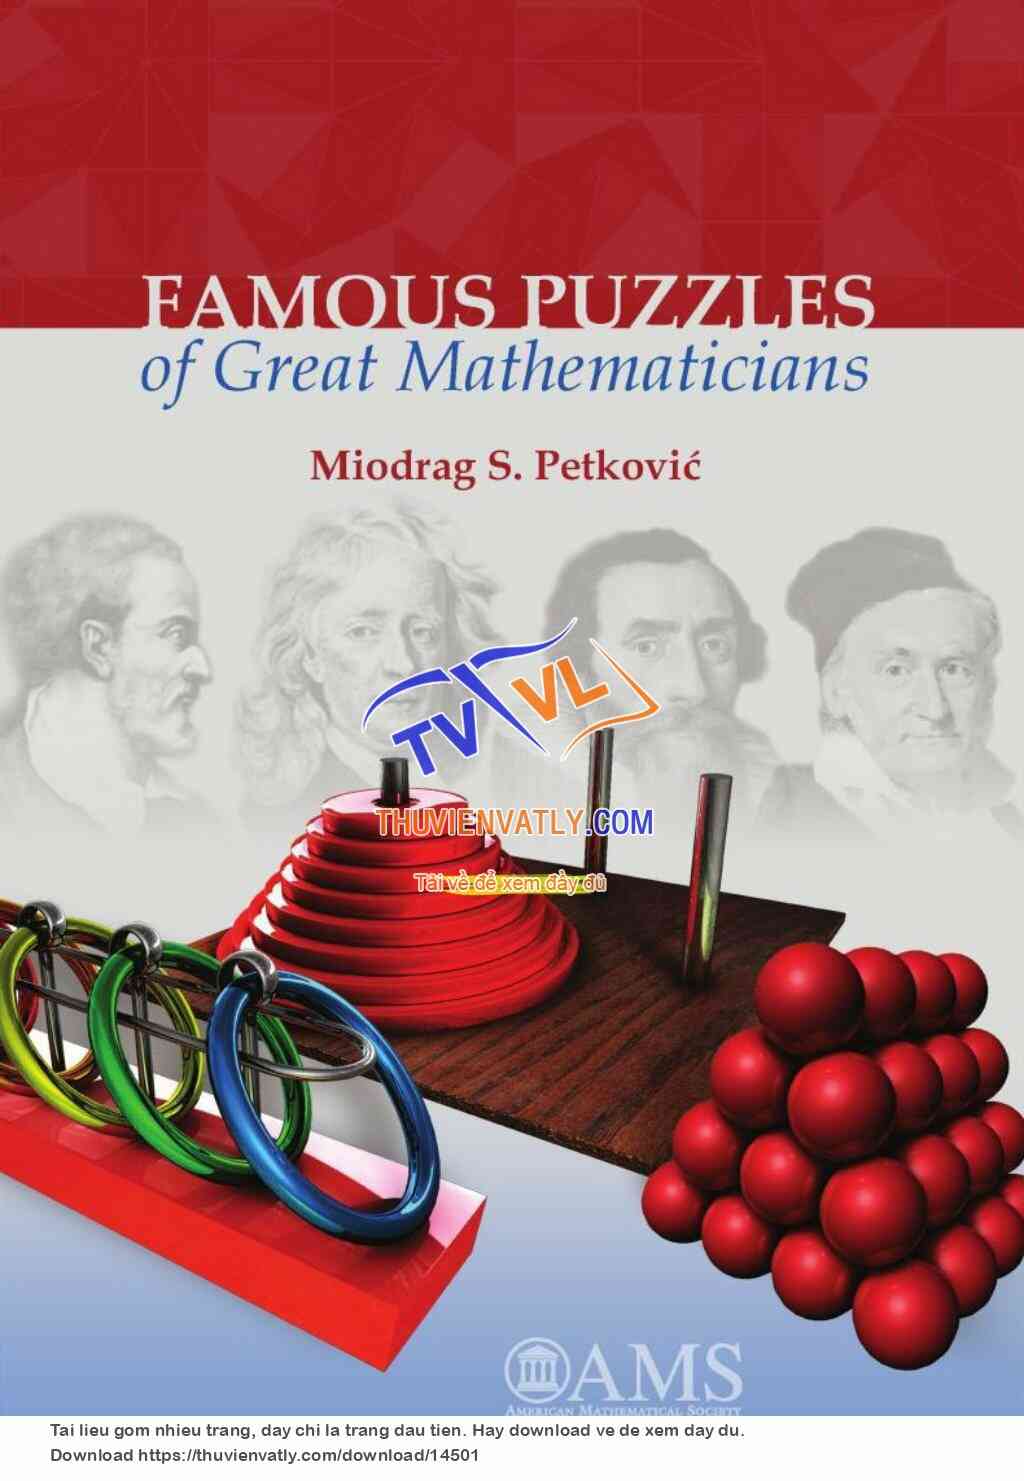 Famous Puzzels of Great Mathematicians (Miodrag S. Petkovic, AMS 2009)